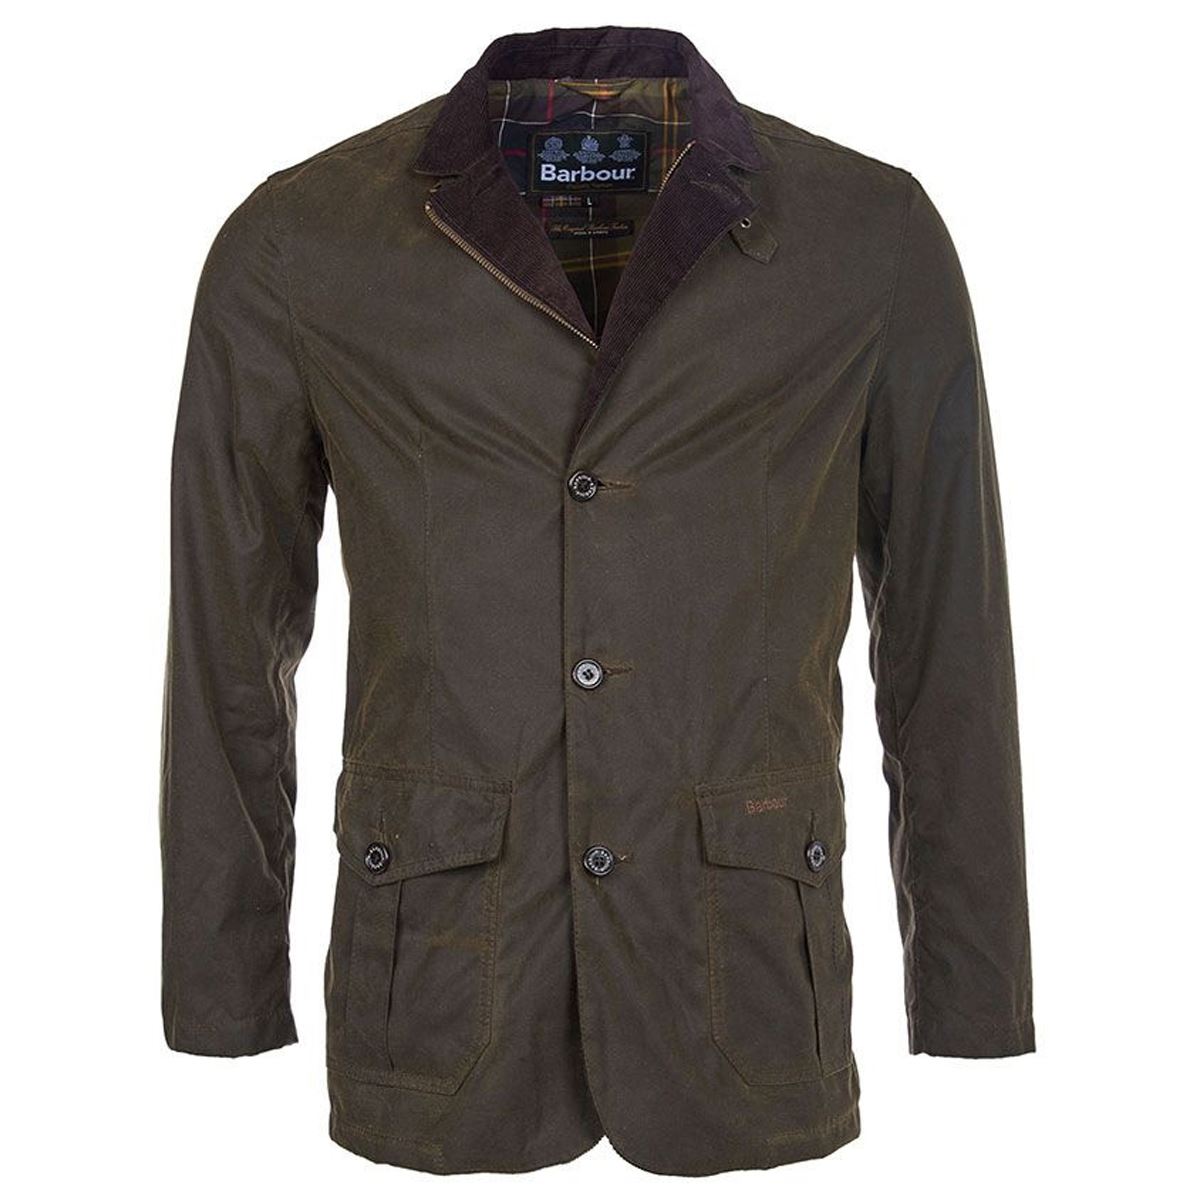 How frequently should the Barbour Lutz jacket be re-waxed?